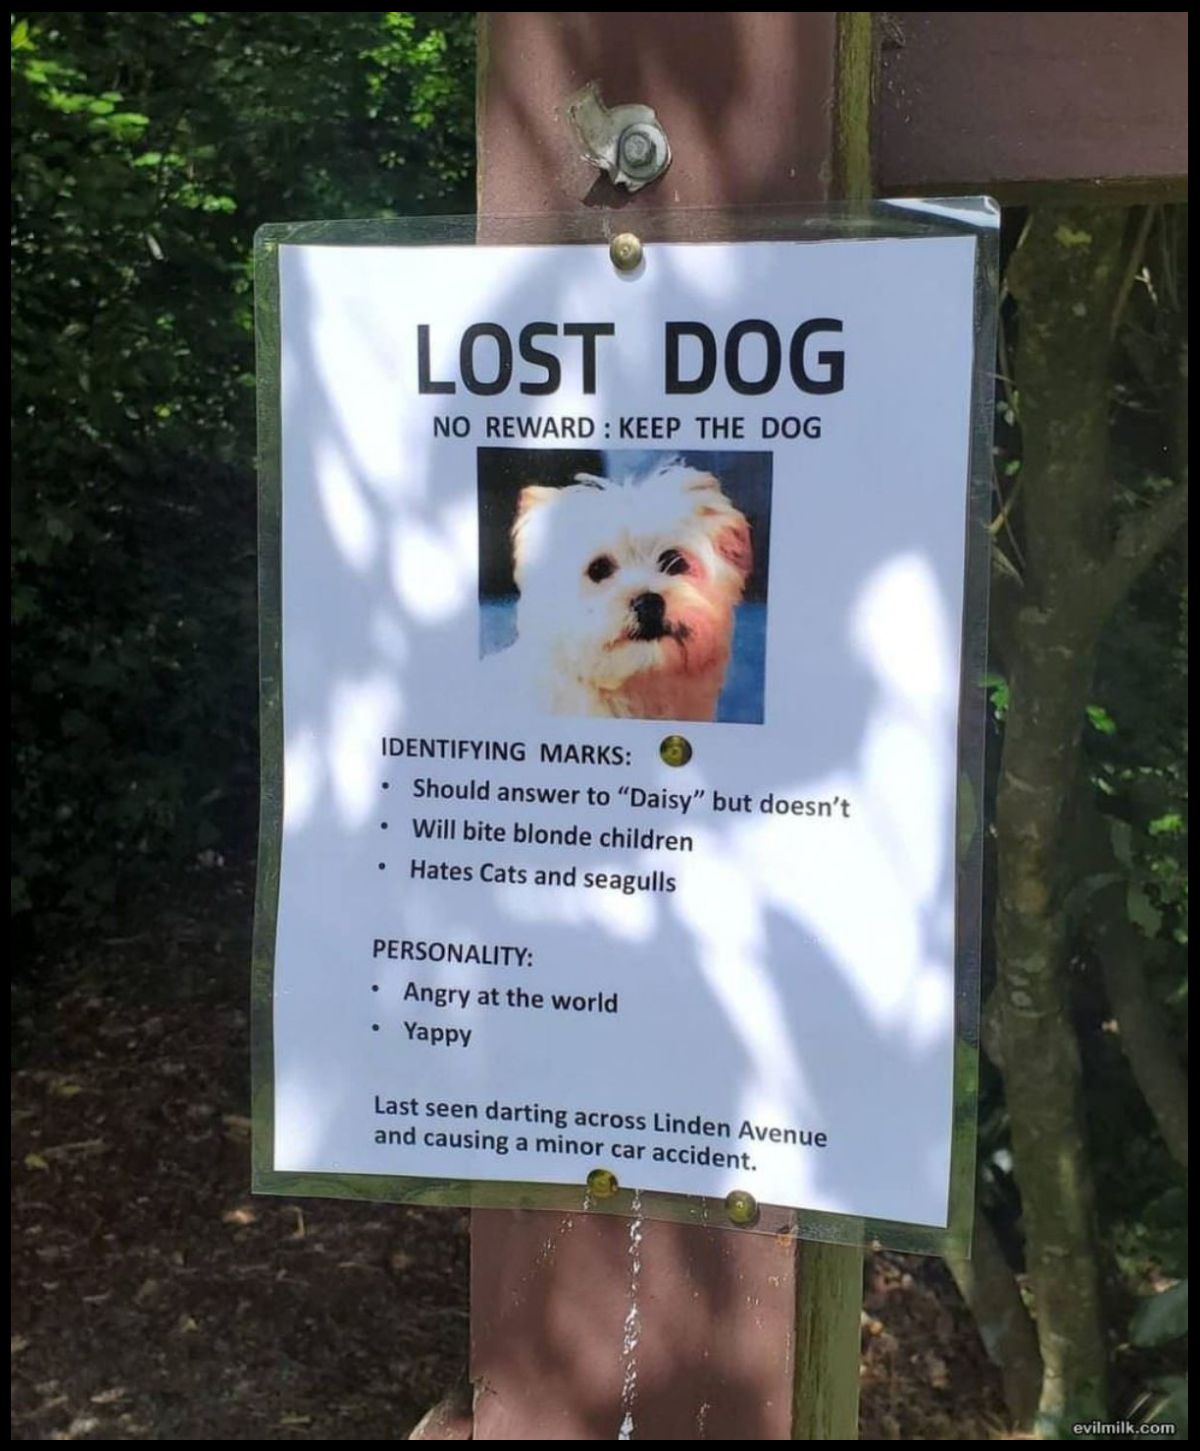 lost dog reward keep it poster - Identifying Marks Should answer to "Daisy" but doesn't Will bite blonde children Hates Cats and seagulls . Lost Dog No Reward Keep The Dog Personality Angry at the world Yappy Last seen darting across Linden Avenue and cau